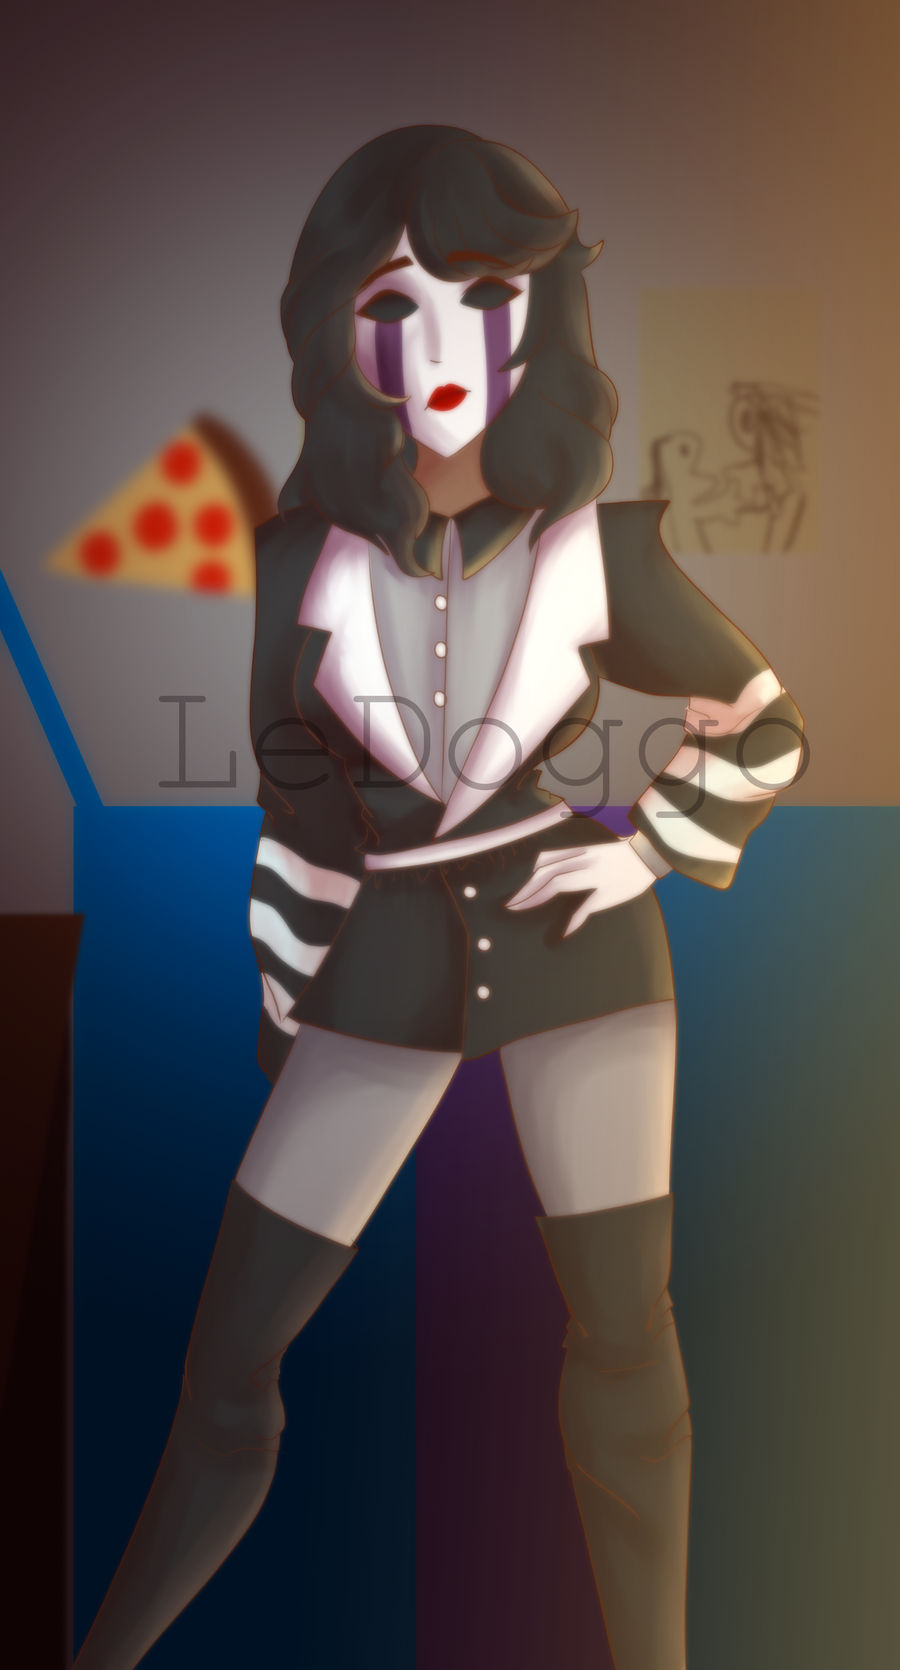 Human Marionette/puppet [FNAF] by couch-queen on DeviantArt